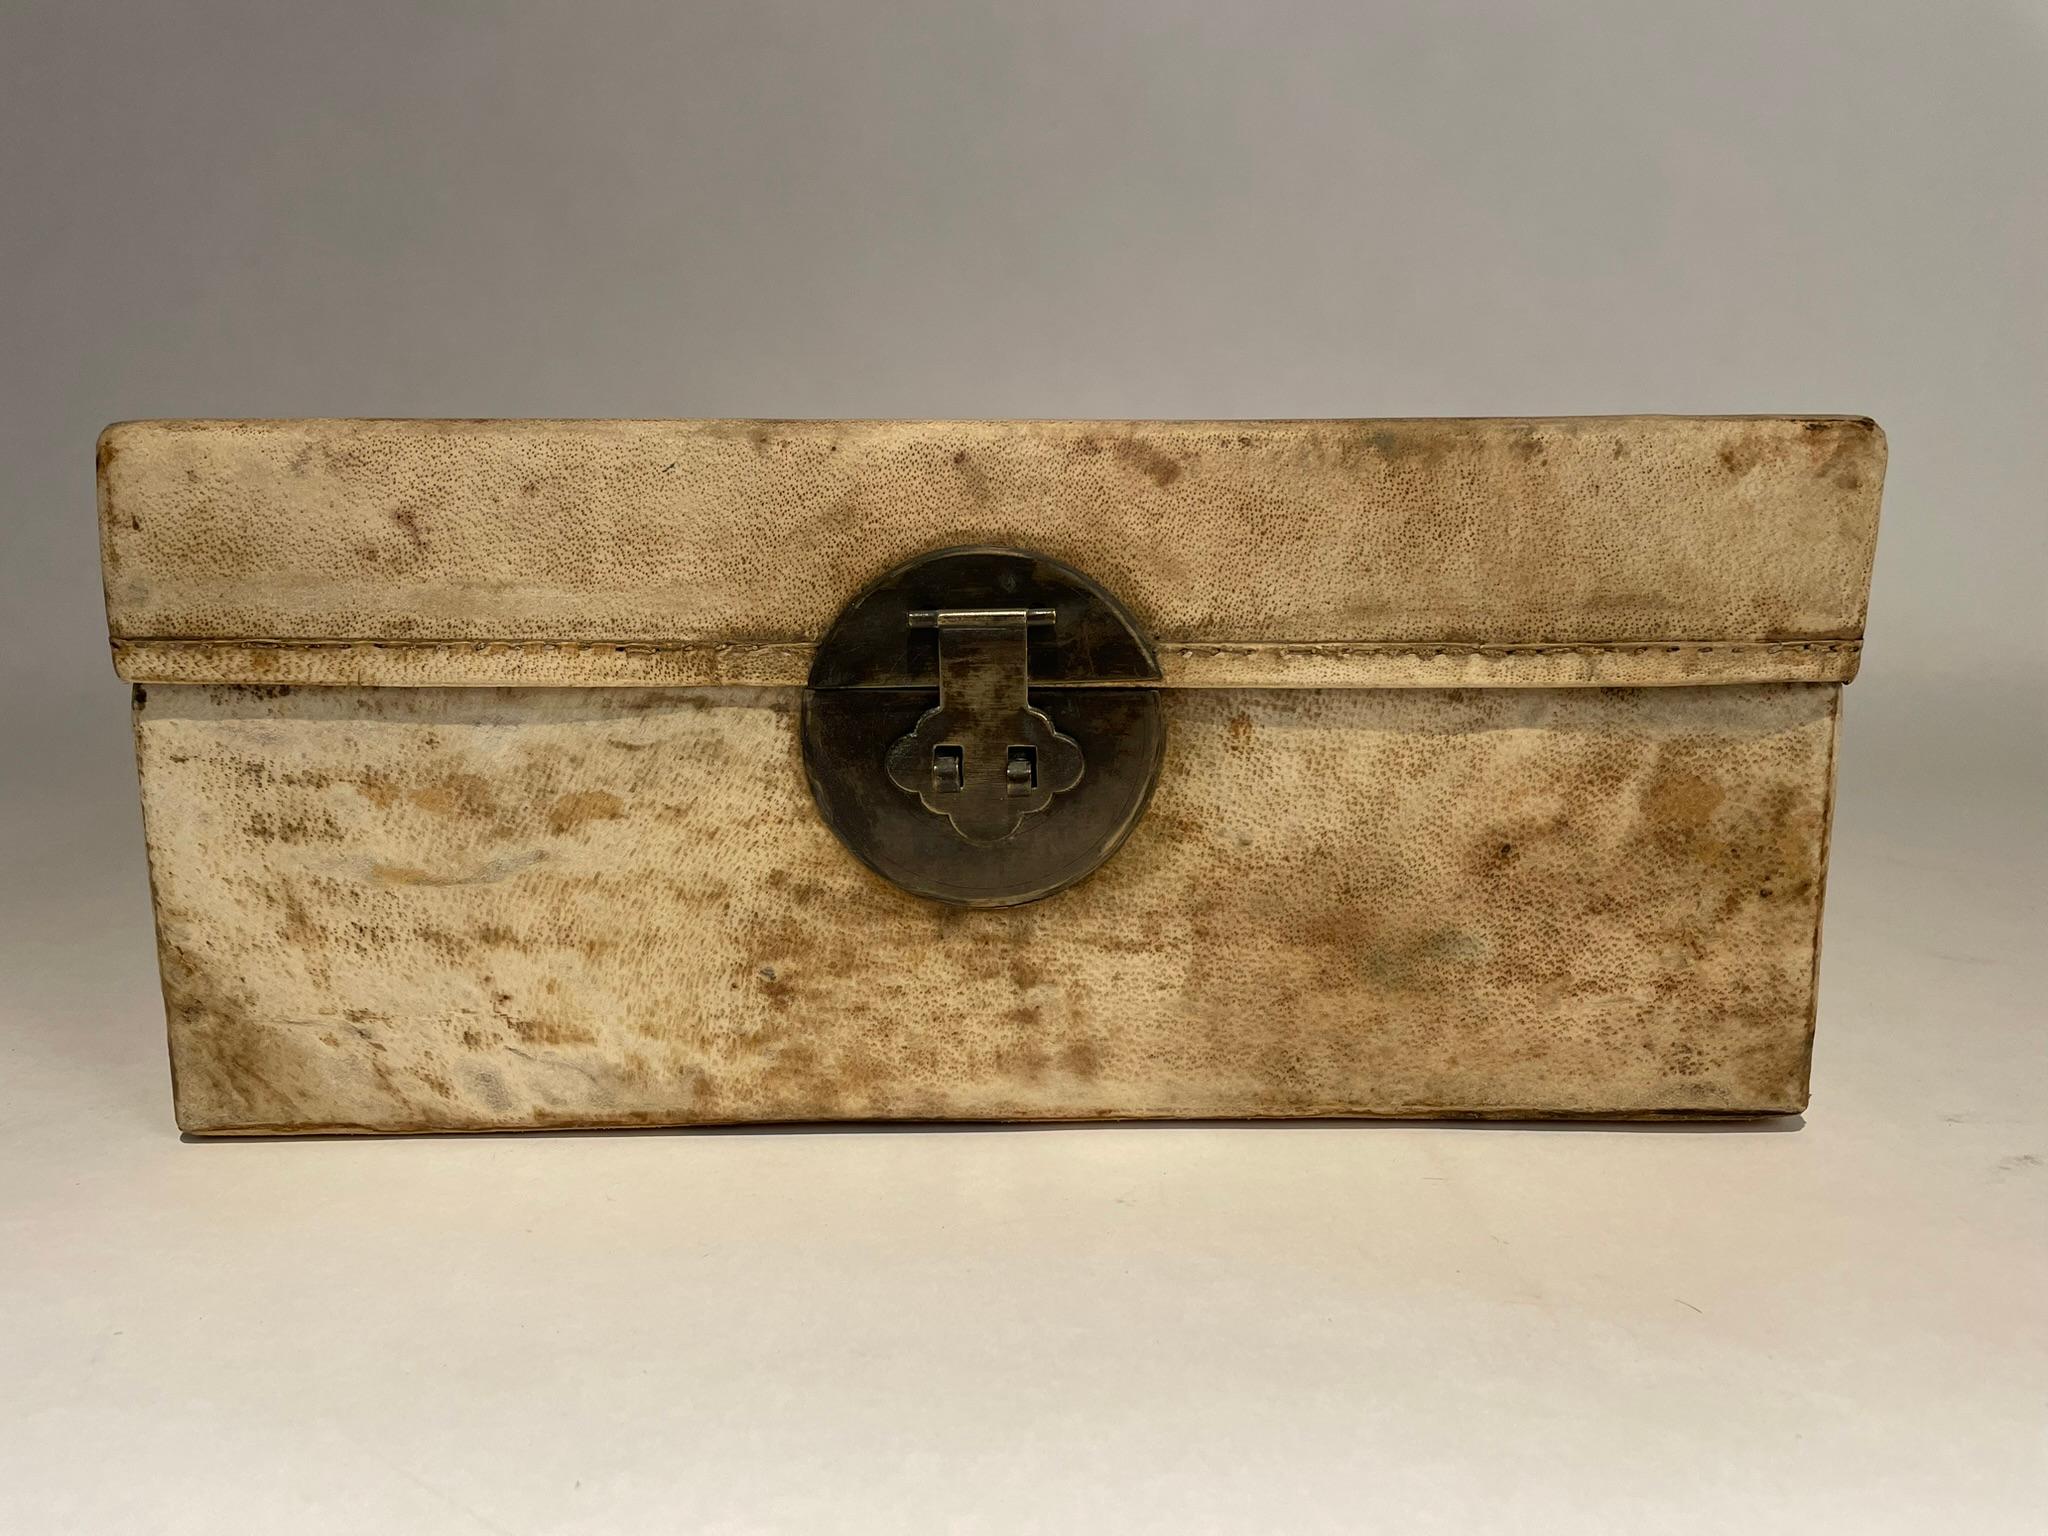 Wonderful and rare 18th century Chinese goatskin parchment covered box with bronze escutcheon and mounts. Love to find a piece like this in original condition. Lined with blue patterned cloth. Classic form, timeless beauty.
16 inches wide 10 deep 7